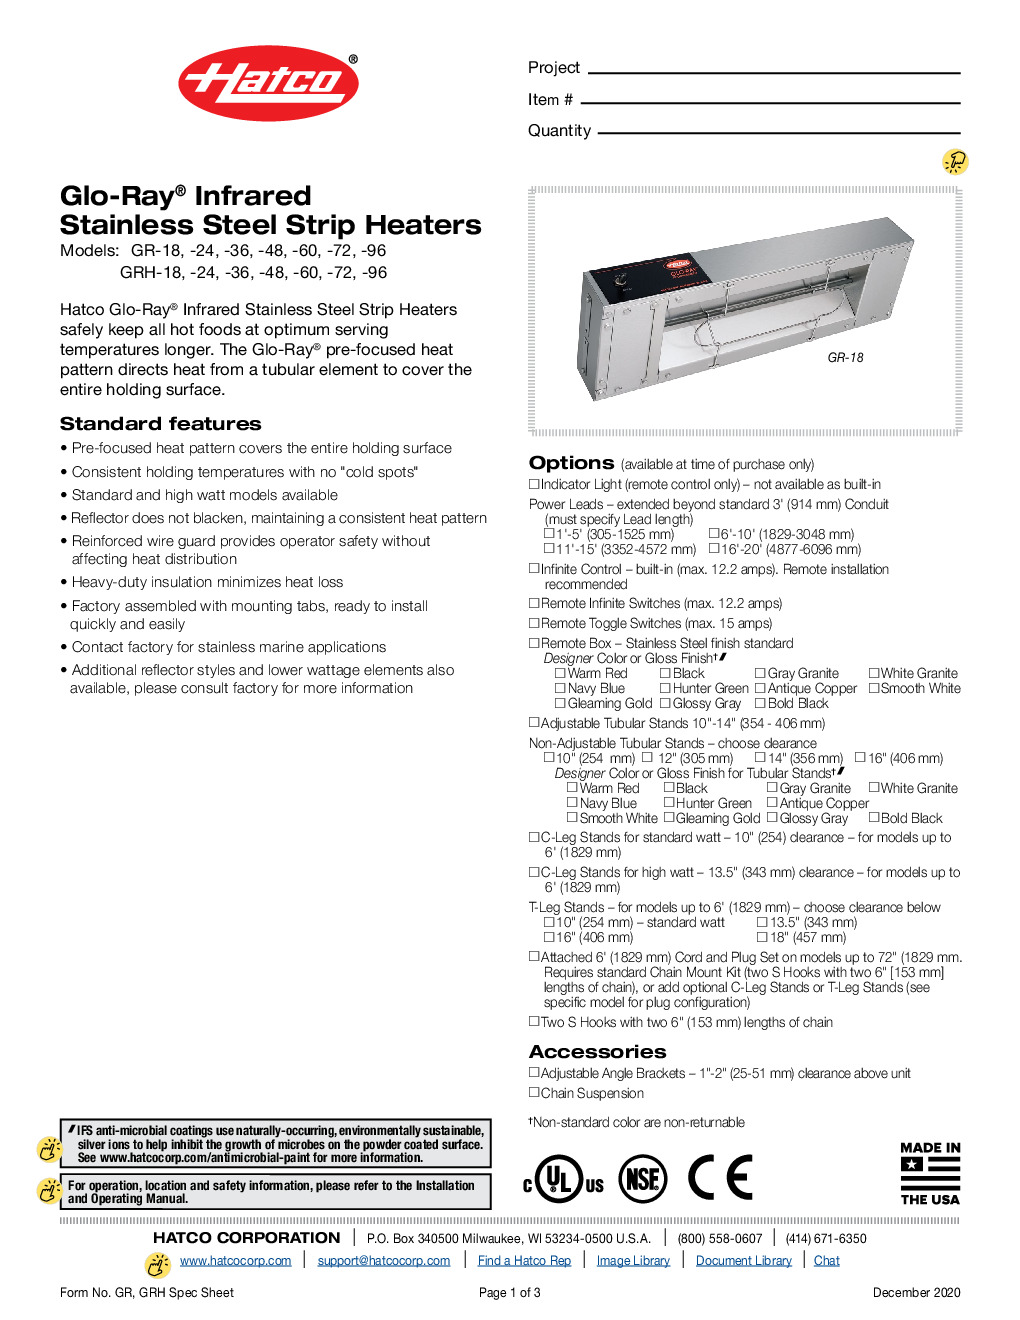 Hatco GR/H-72 Glo-Ray Infrared Stainless Steel Strip Heaters